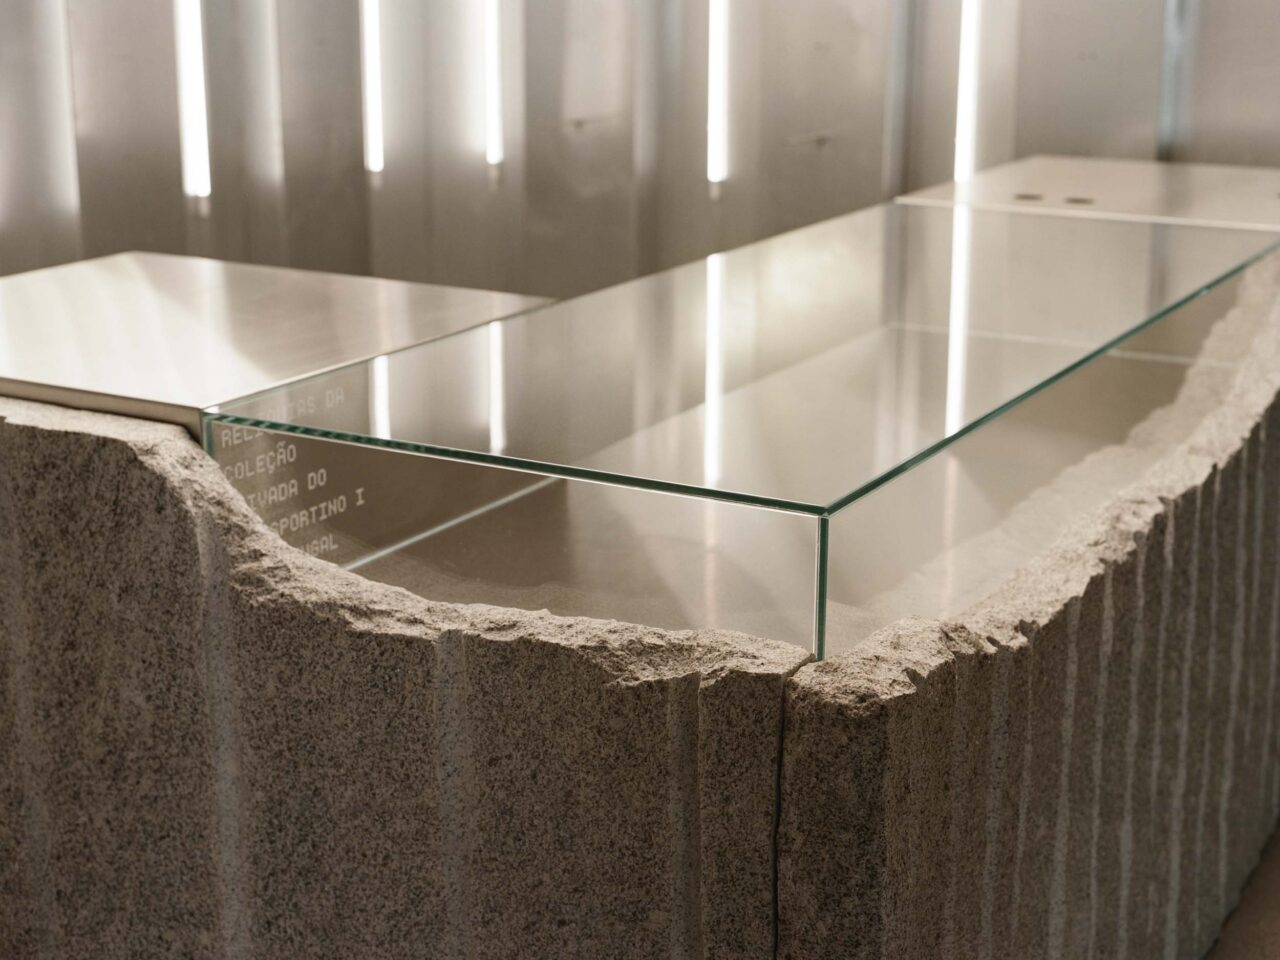 An imperfect stone counter from which a glass top emerges